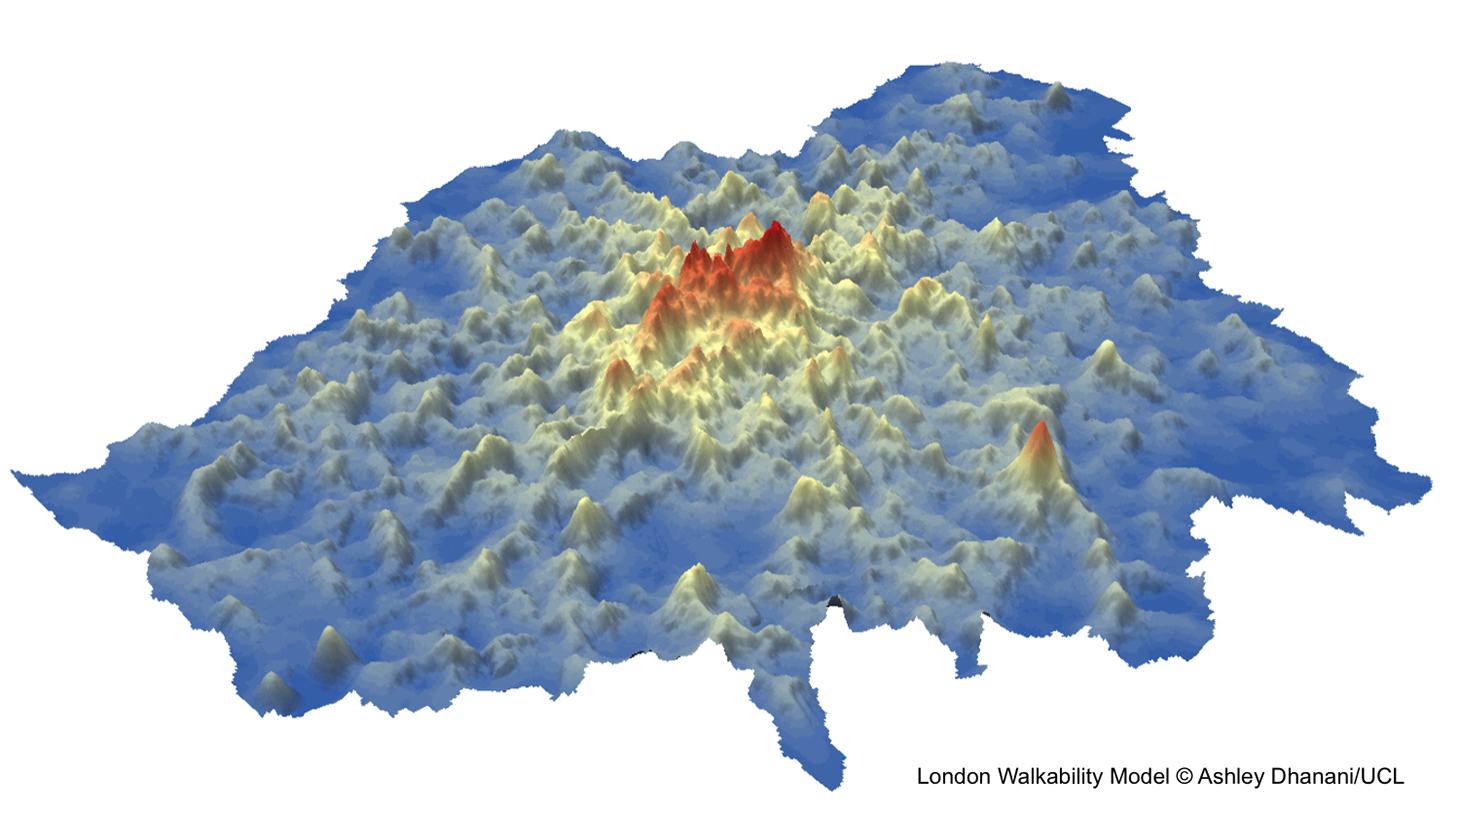 Fig 3. 3D visualisation of London's varying walkability